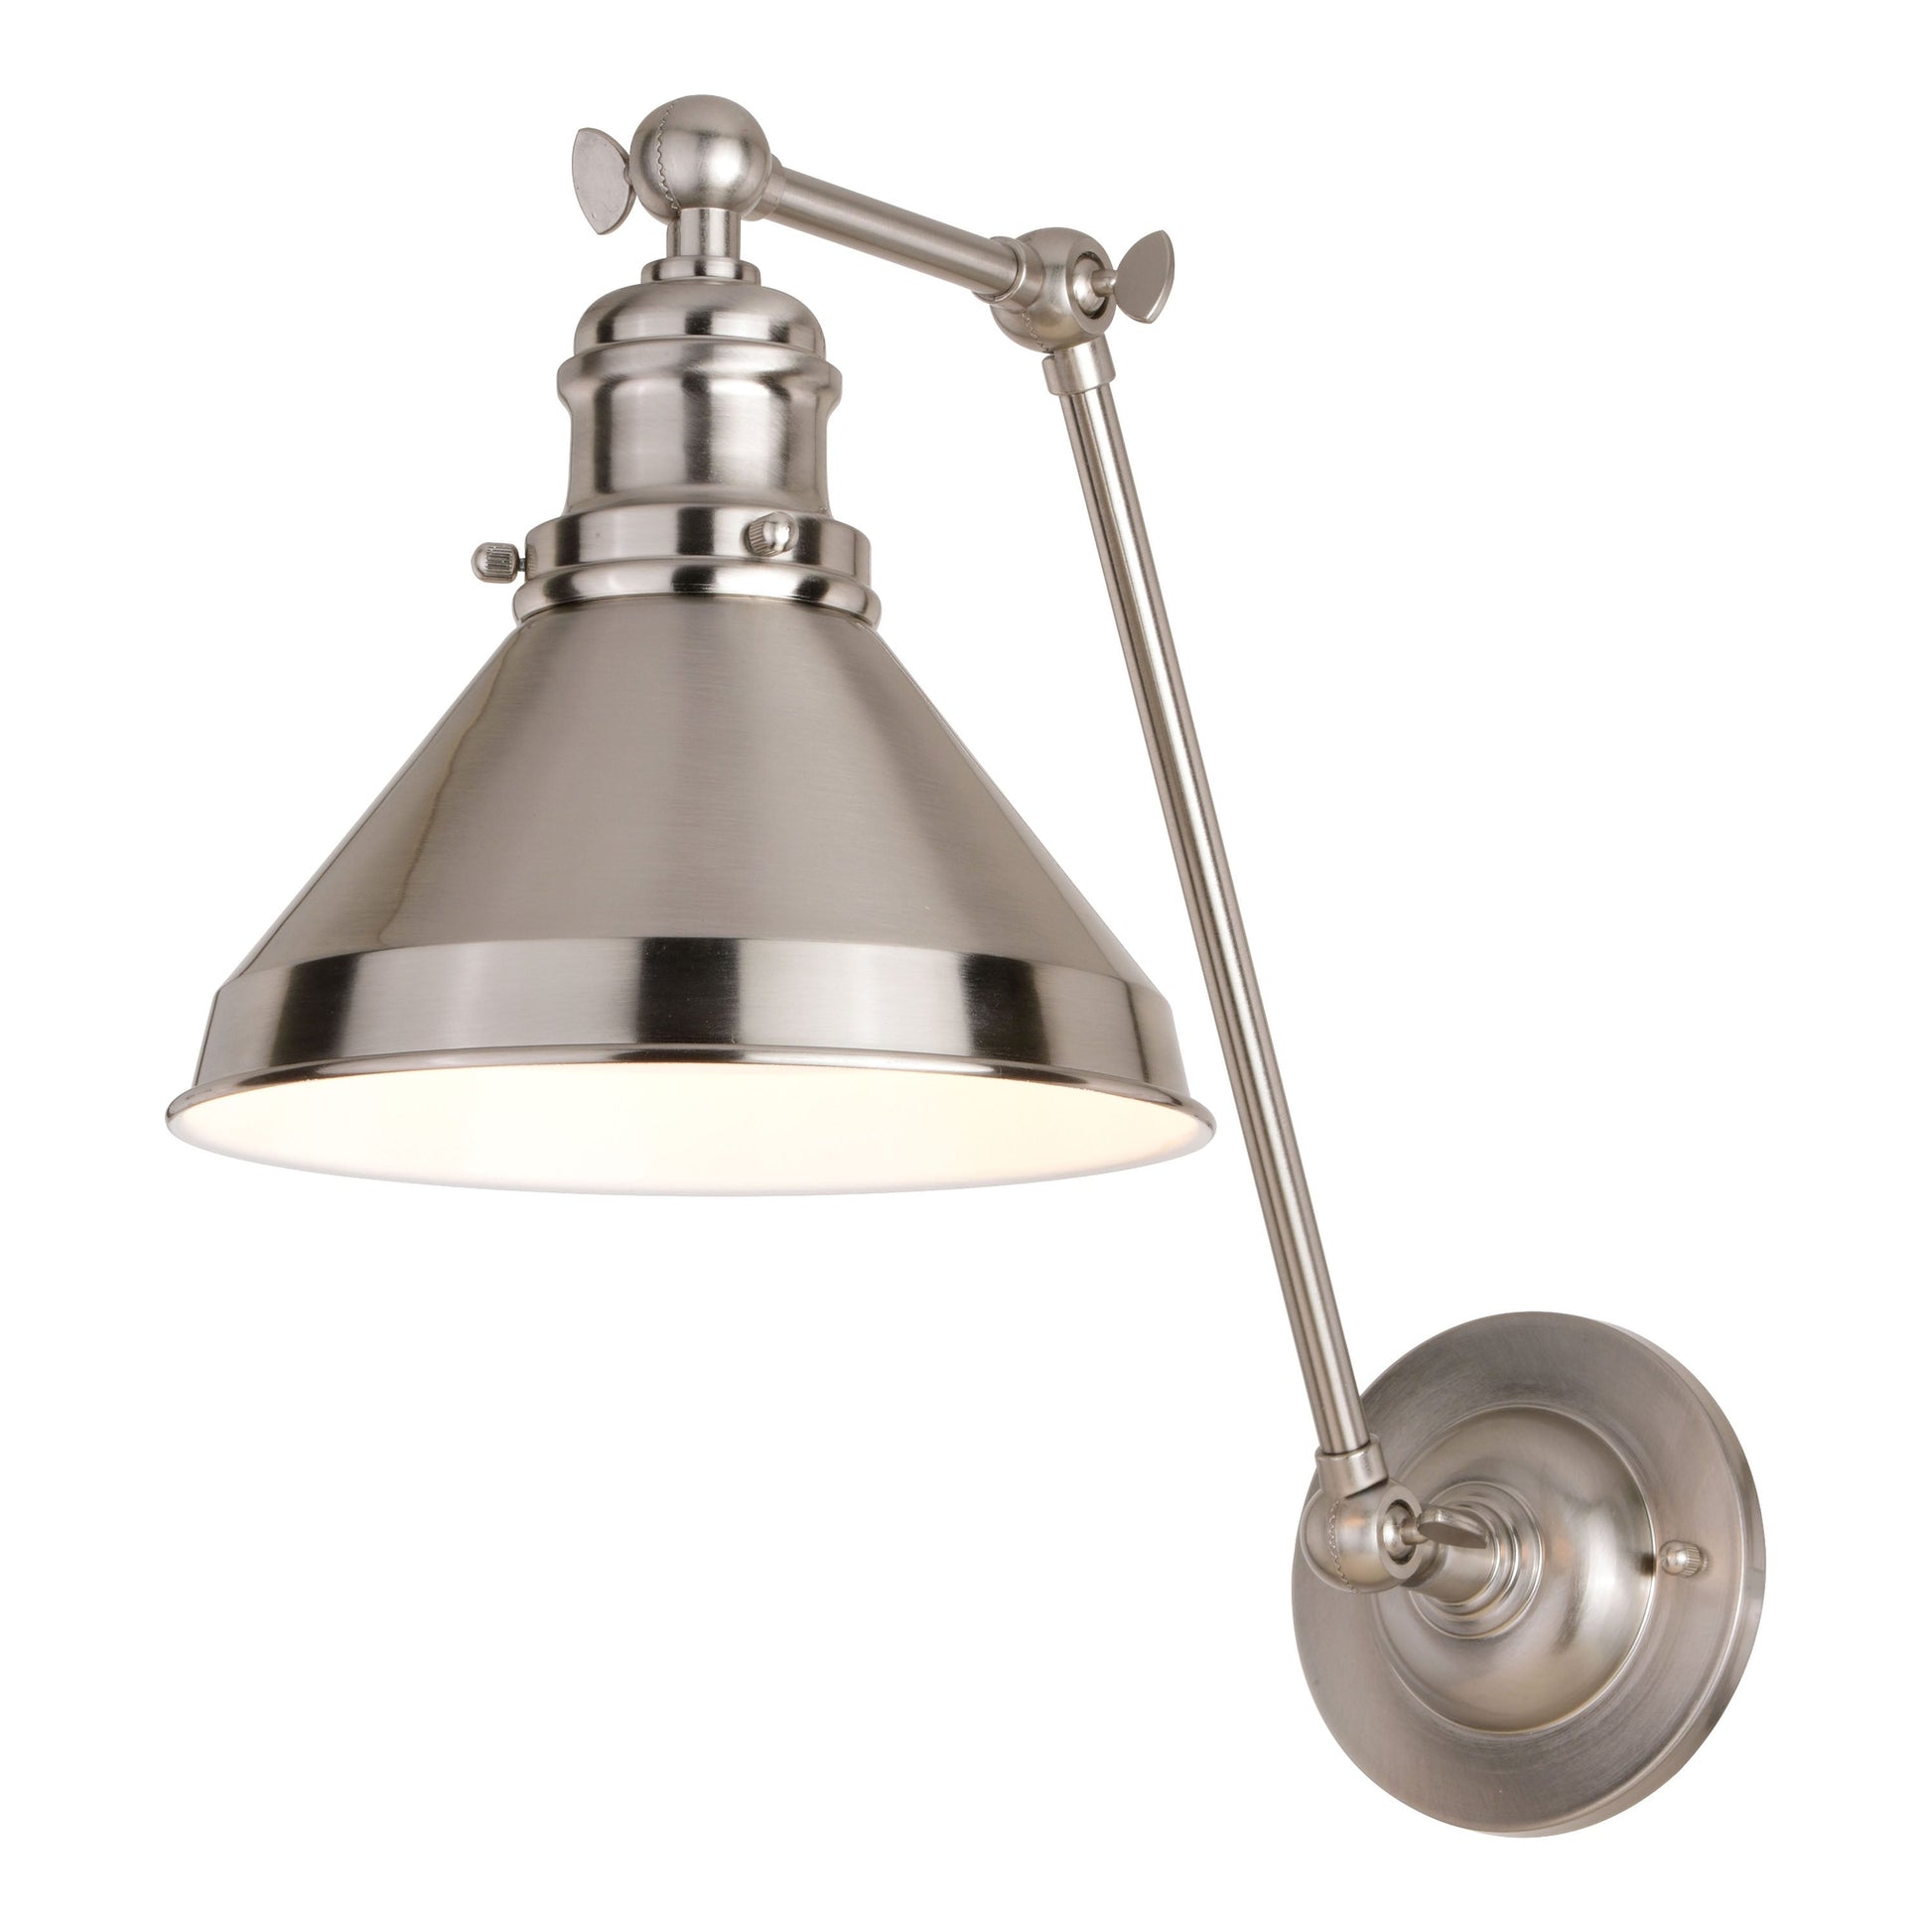 Vaxcel Alexis 8" 1-Light Satin Nickel and Matte White Adjustable Swing Arm Wall Light With Metal Shade